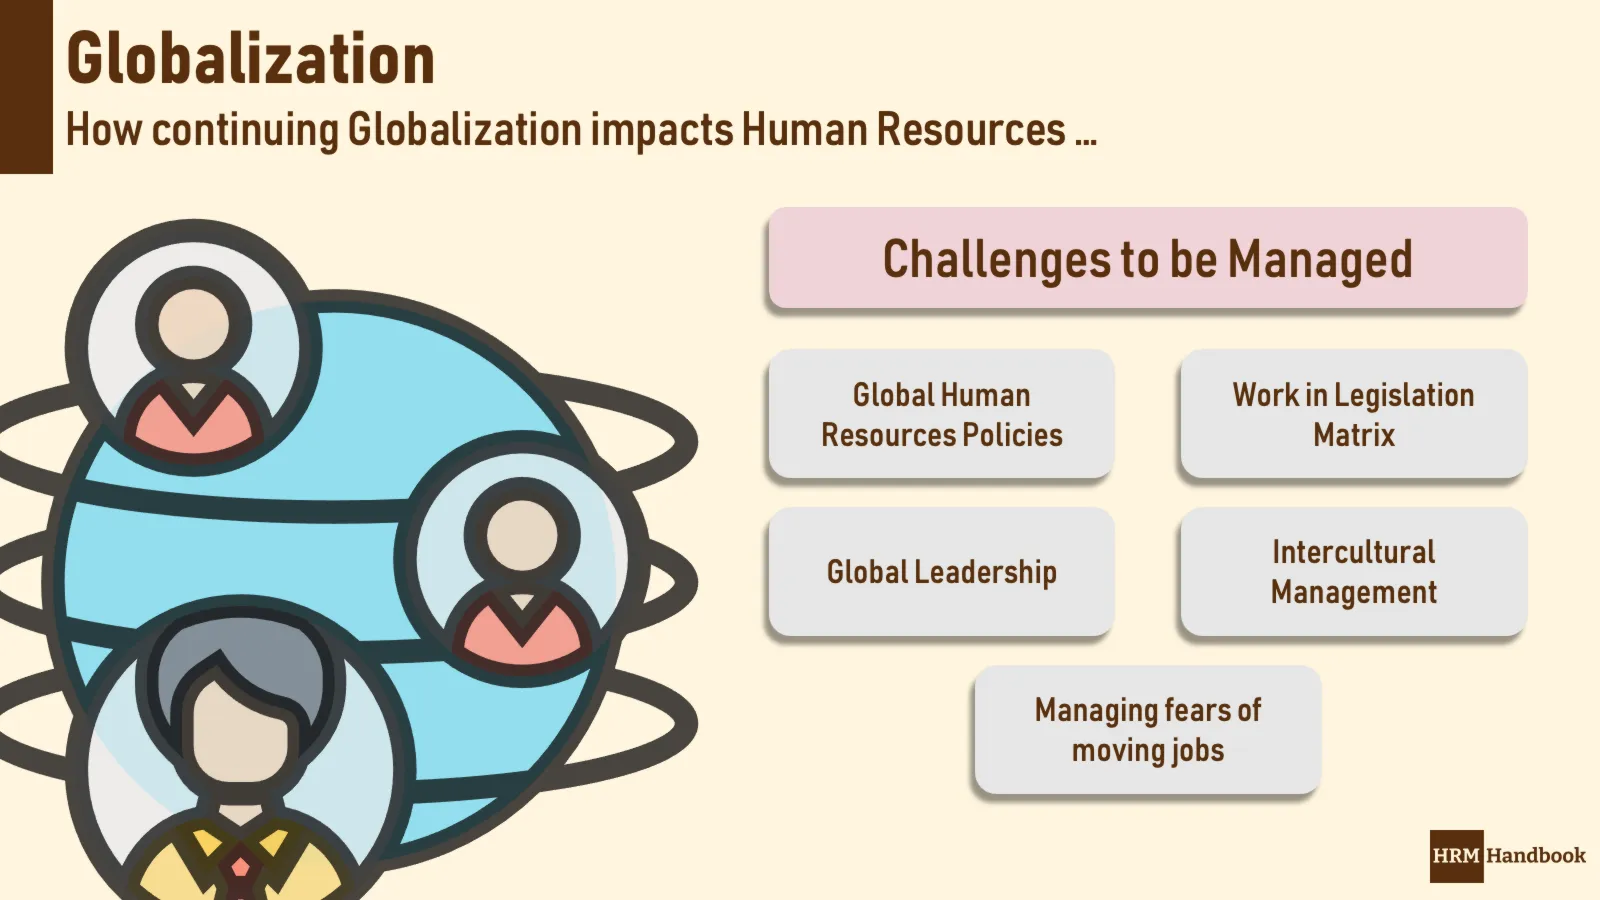 Challenges arising from Globalization for Human Resources